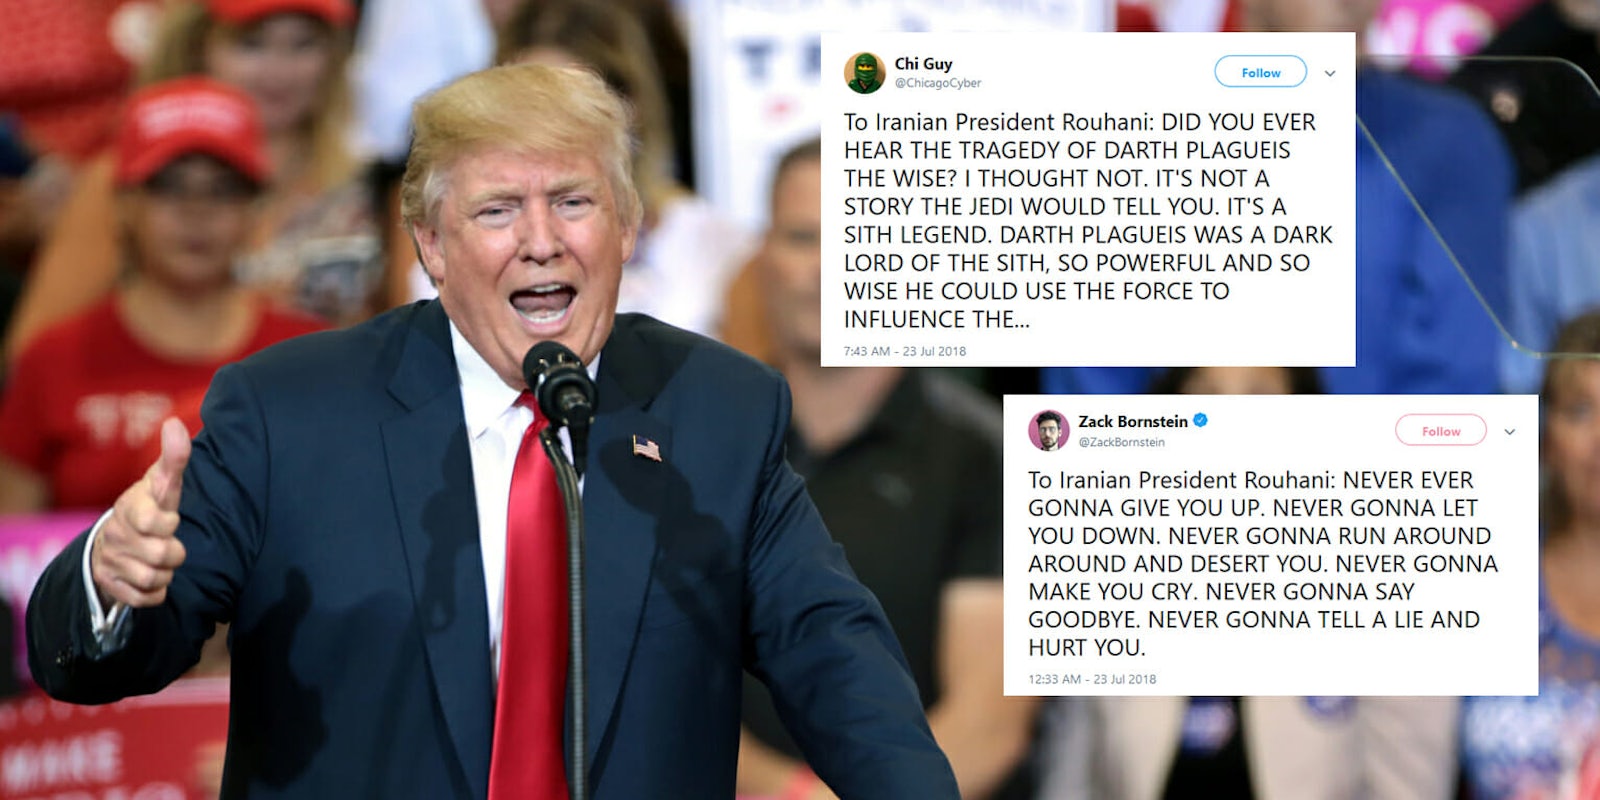 President Donald Trump made an all-caps tweet threat to Iran on Sunday. It was quickly turned into a meme–with people on Twitter mocking it mercilessly